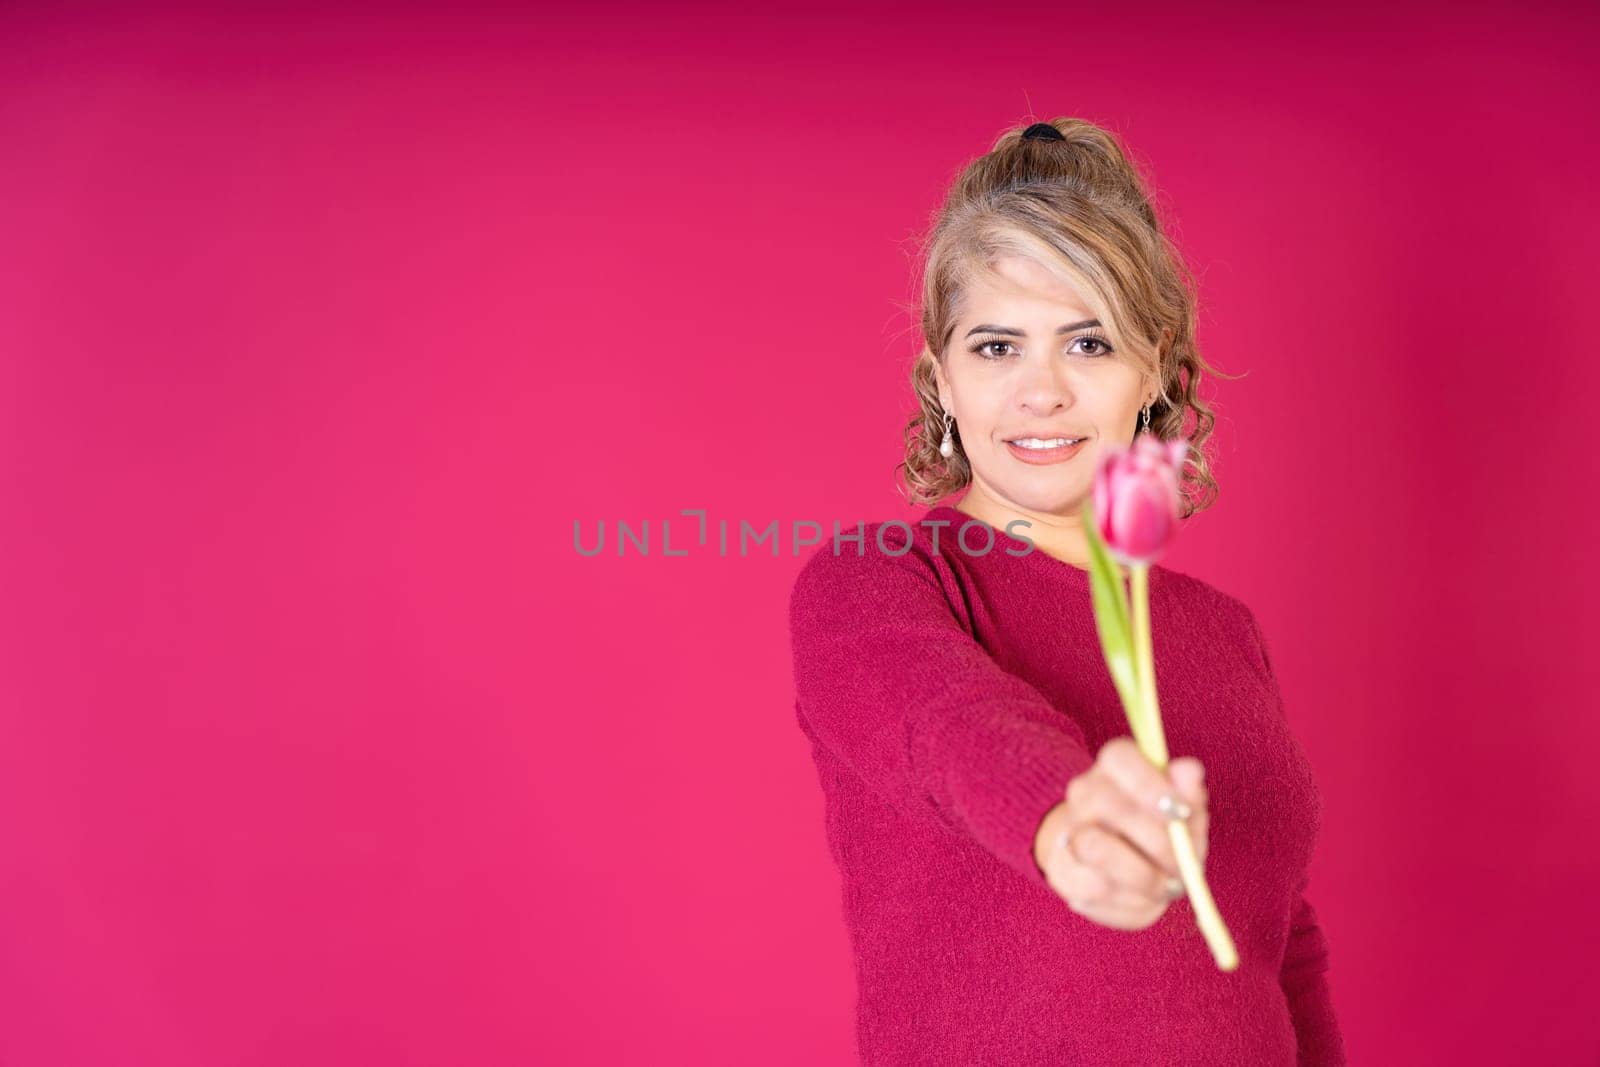 Young pretty woman smiling looking at camera offering a tulip flower, wearing a red t-shirt on a red background with copy space. Gifts concept. by Ceballos